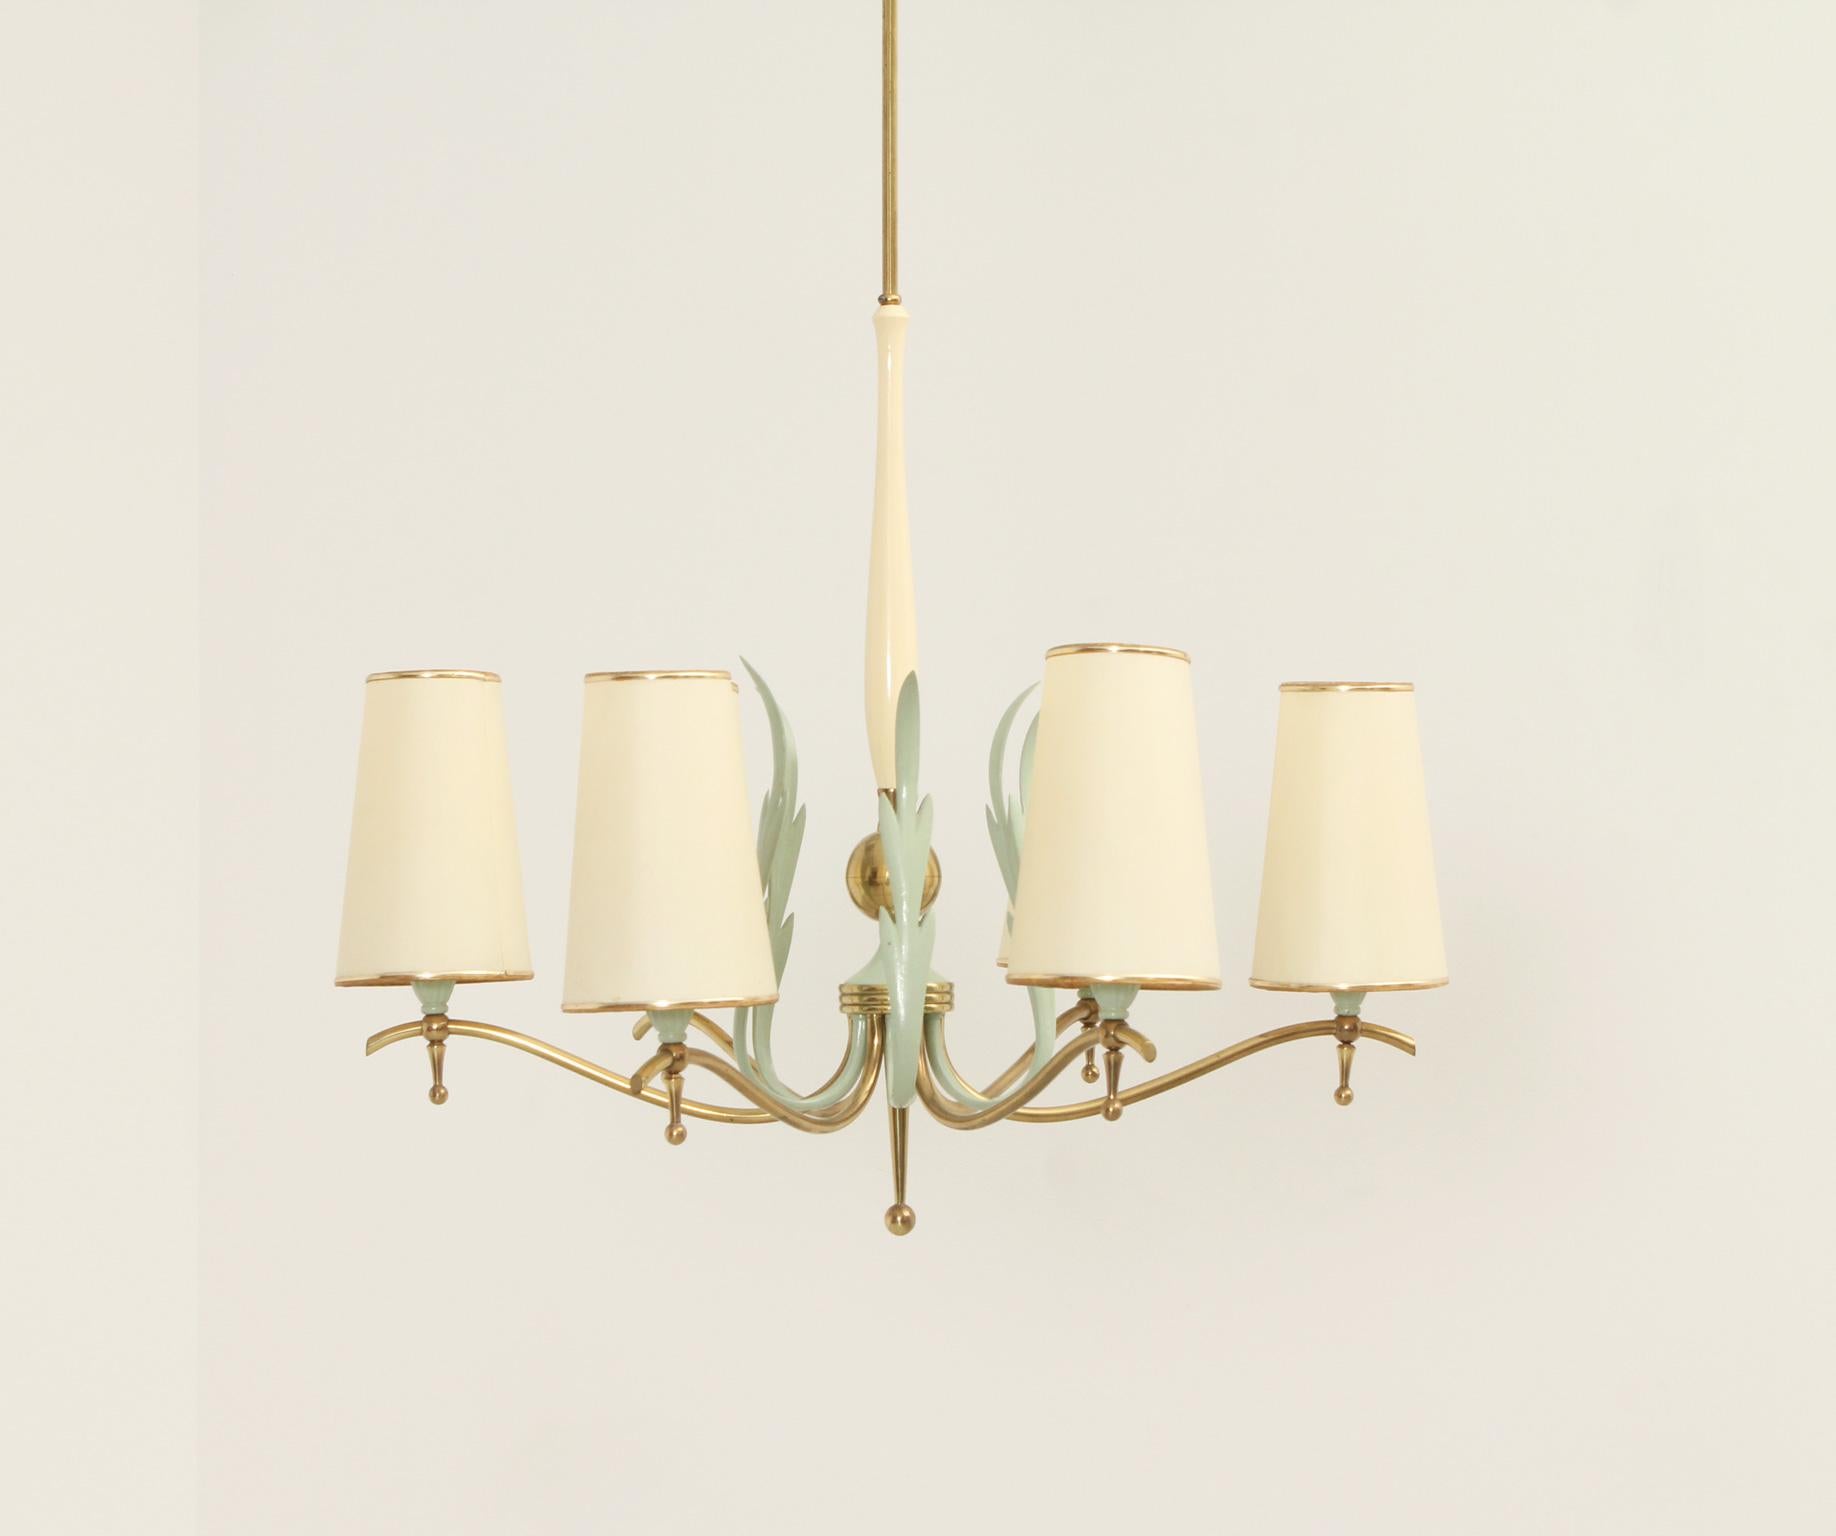 Pendant Lamp with Six Arms by Stilnovo, Italy, 1940's For Sale 5